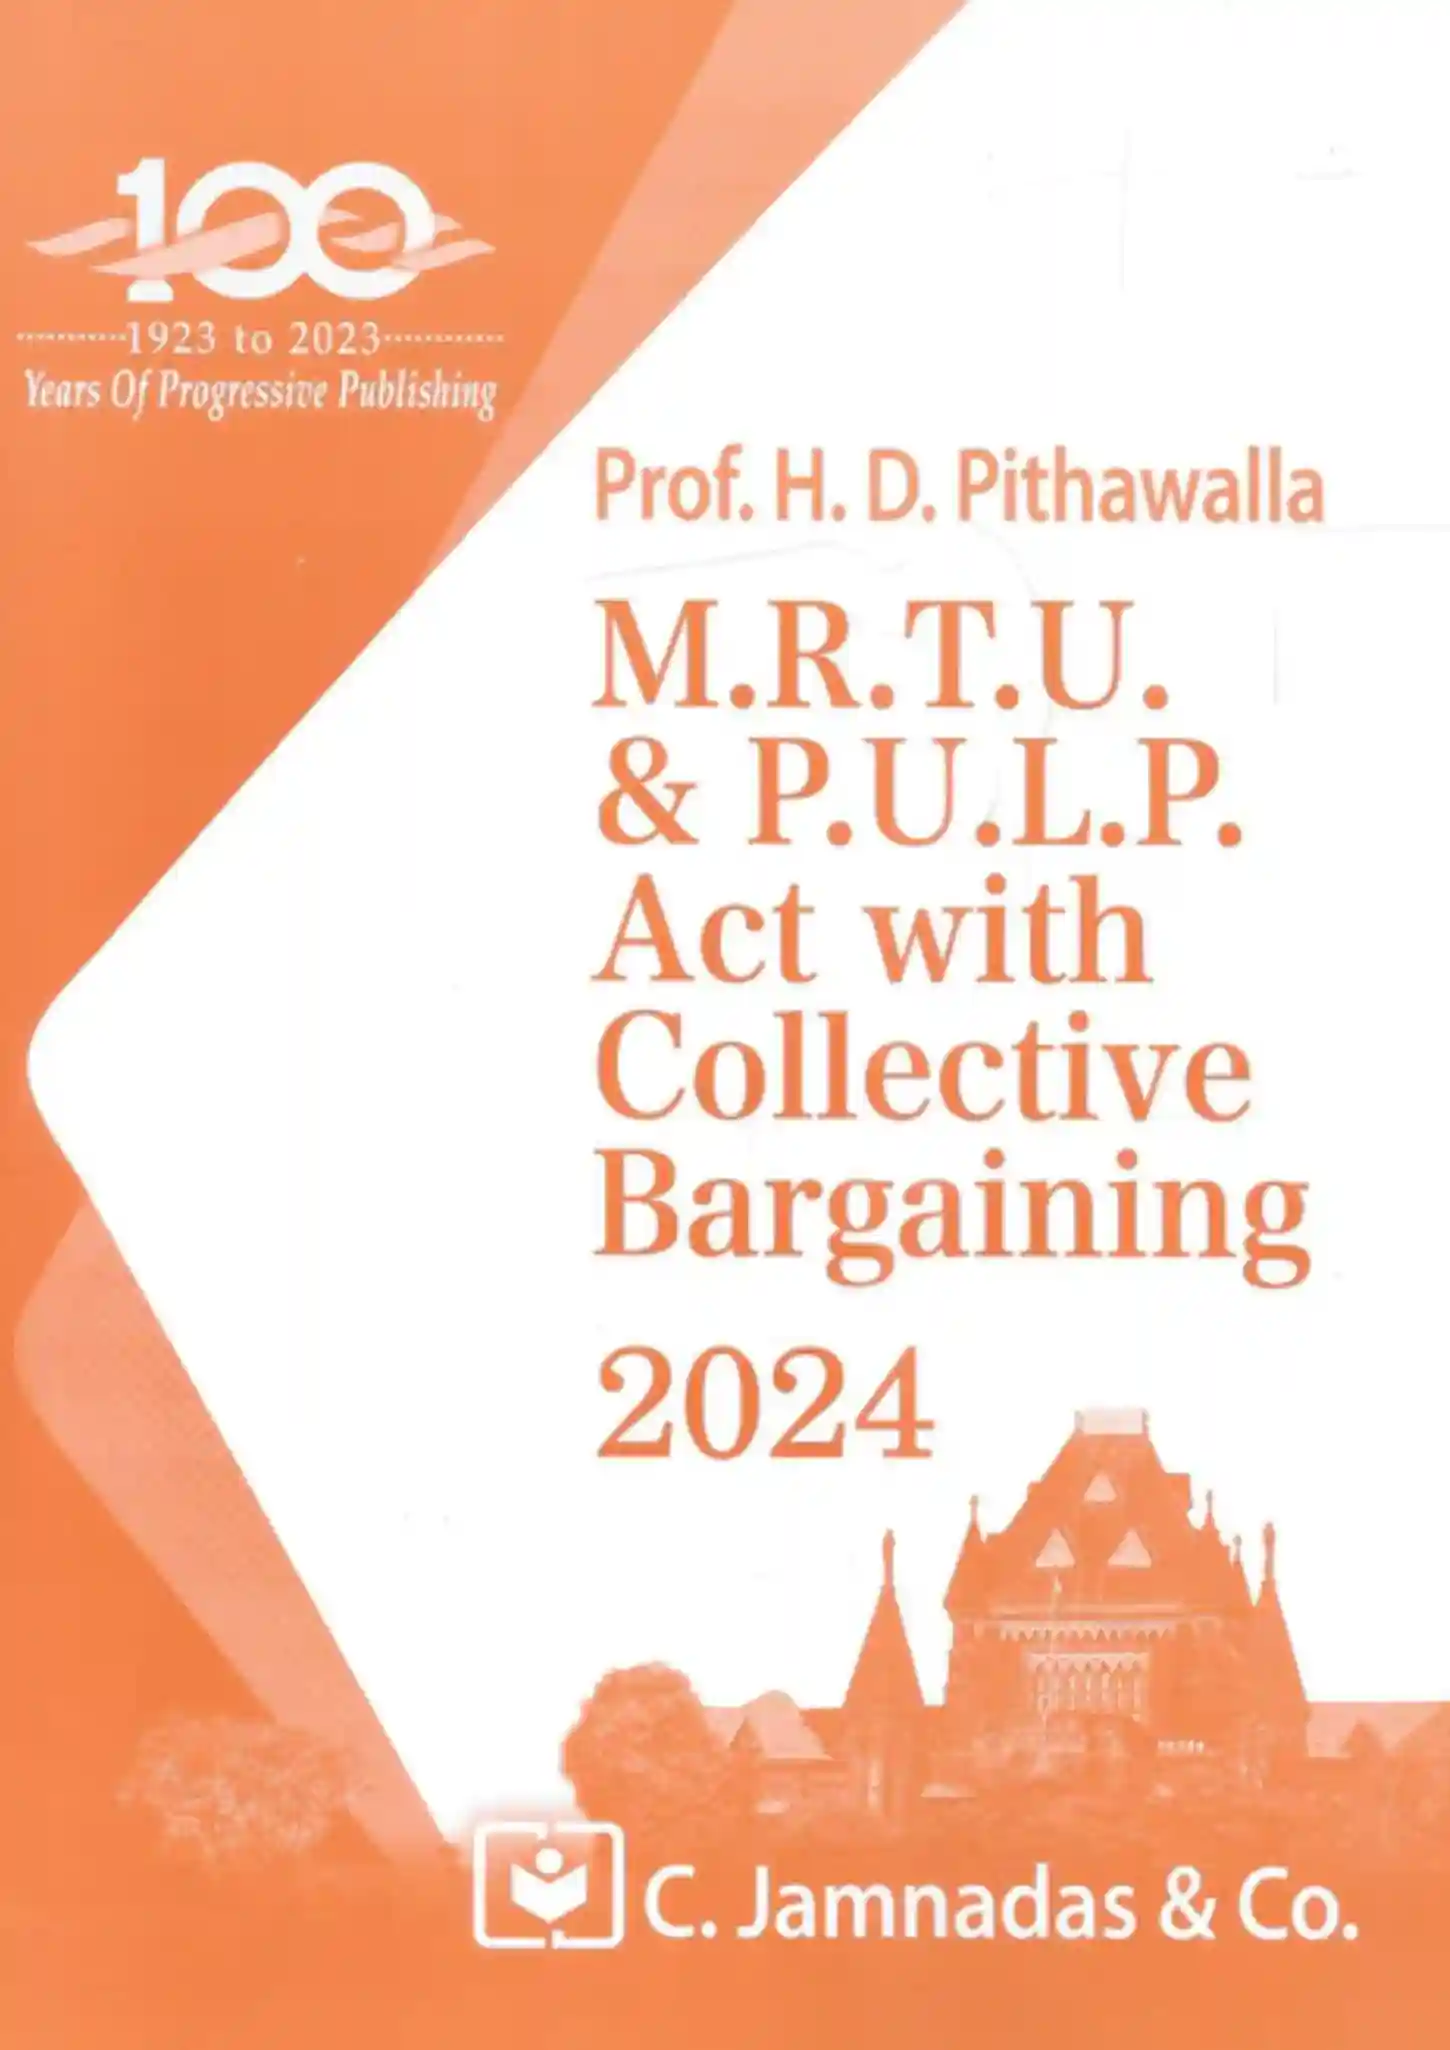  M.R.T.U. & P.U.L.P. Act with Collective Bargaining 2024